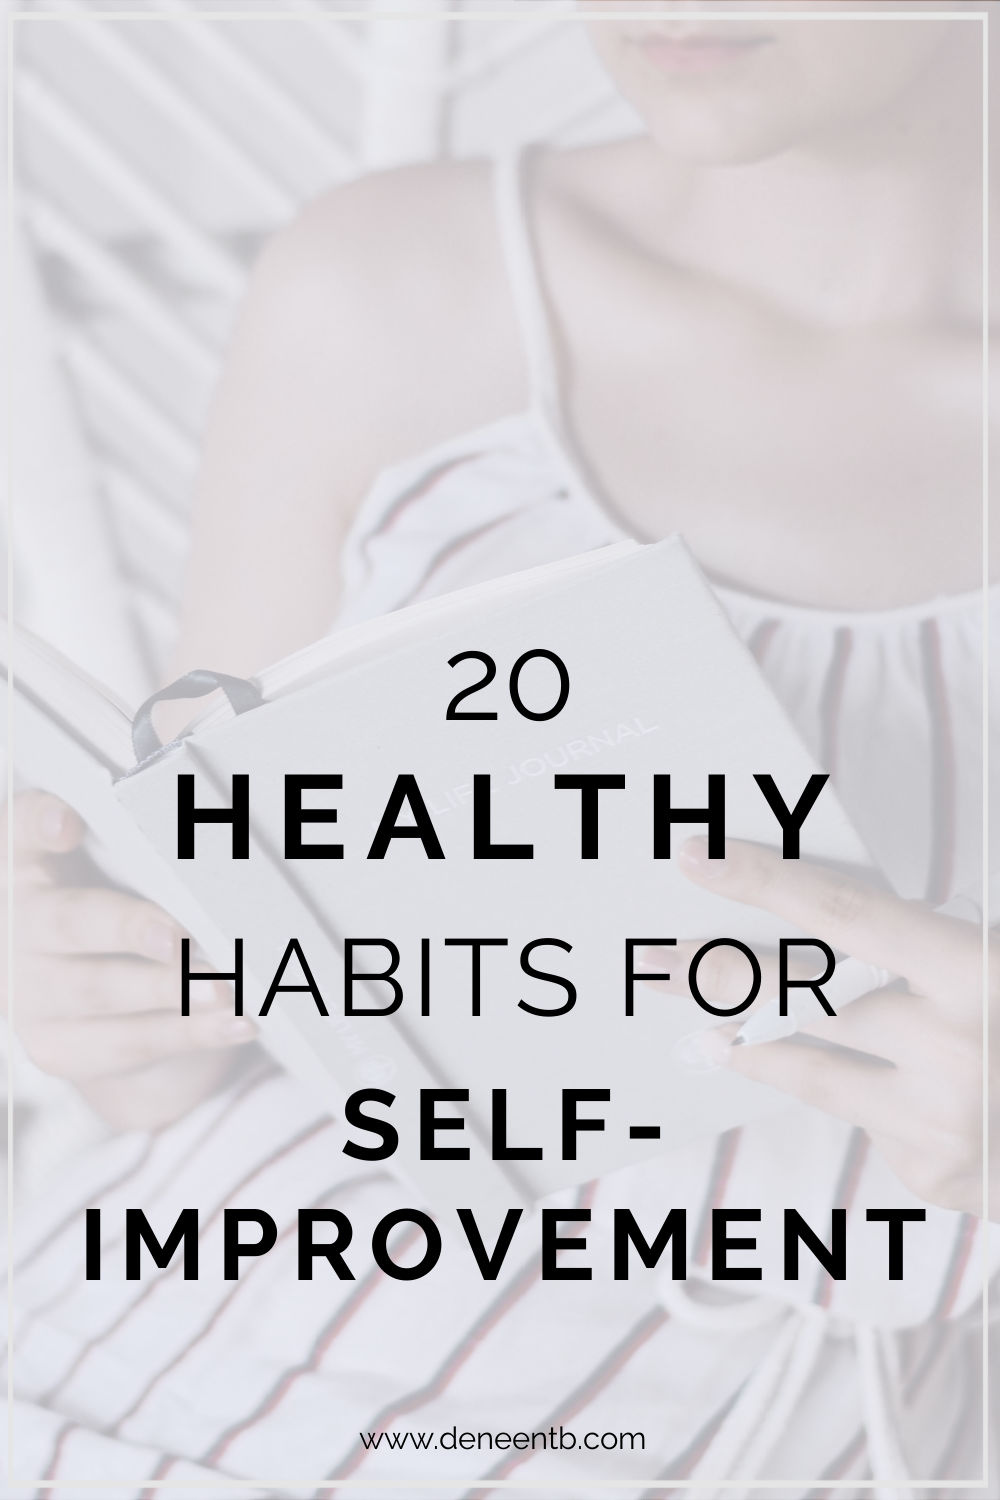 Overlay says 20 habits for self-improvement